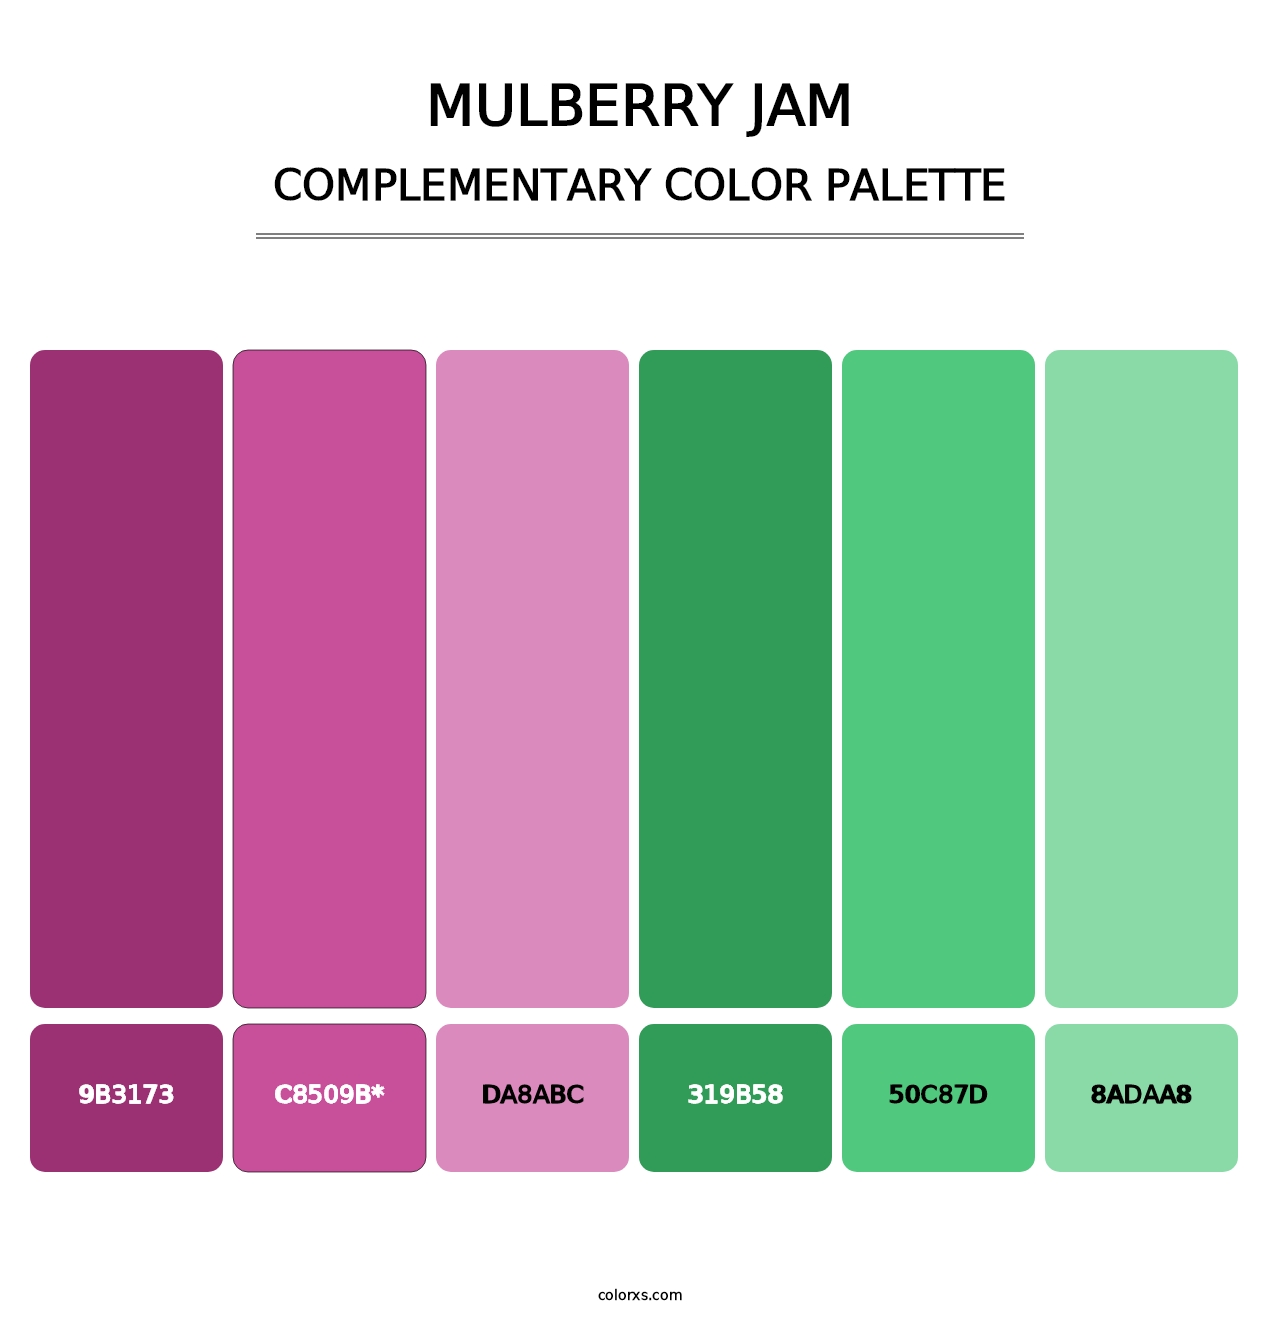 Mulberry Jam - Complementary Color Palette